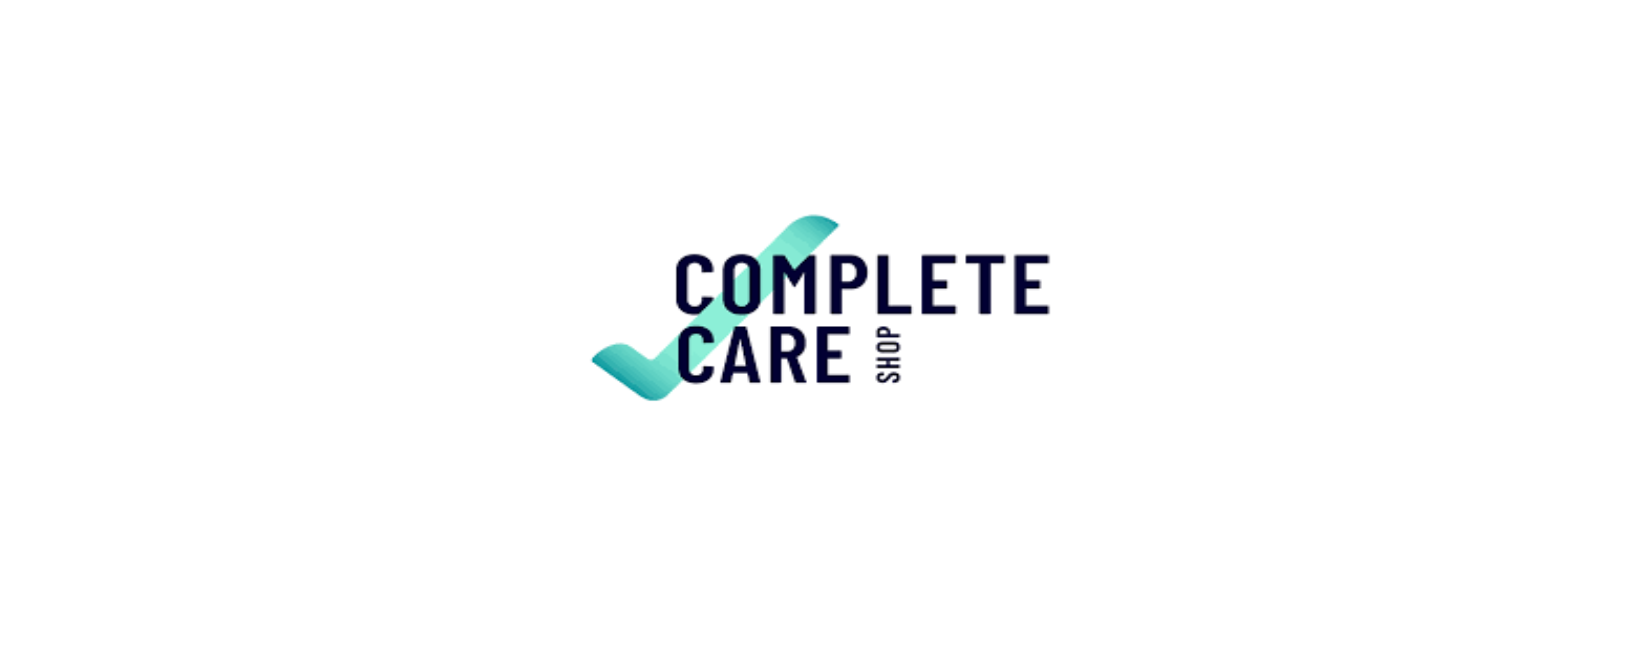 Complete Care Shop UK Discount Code 2022